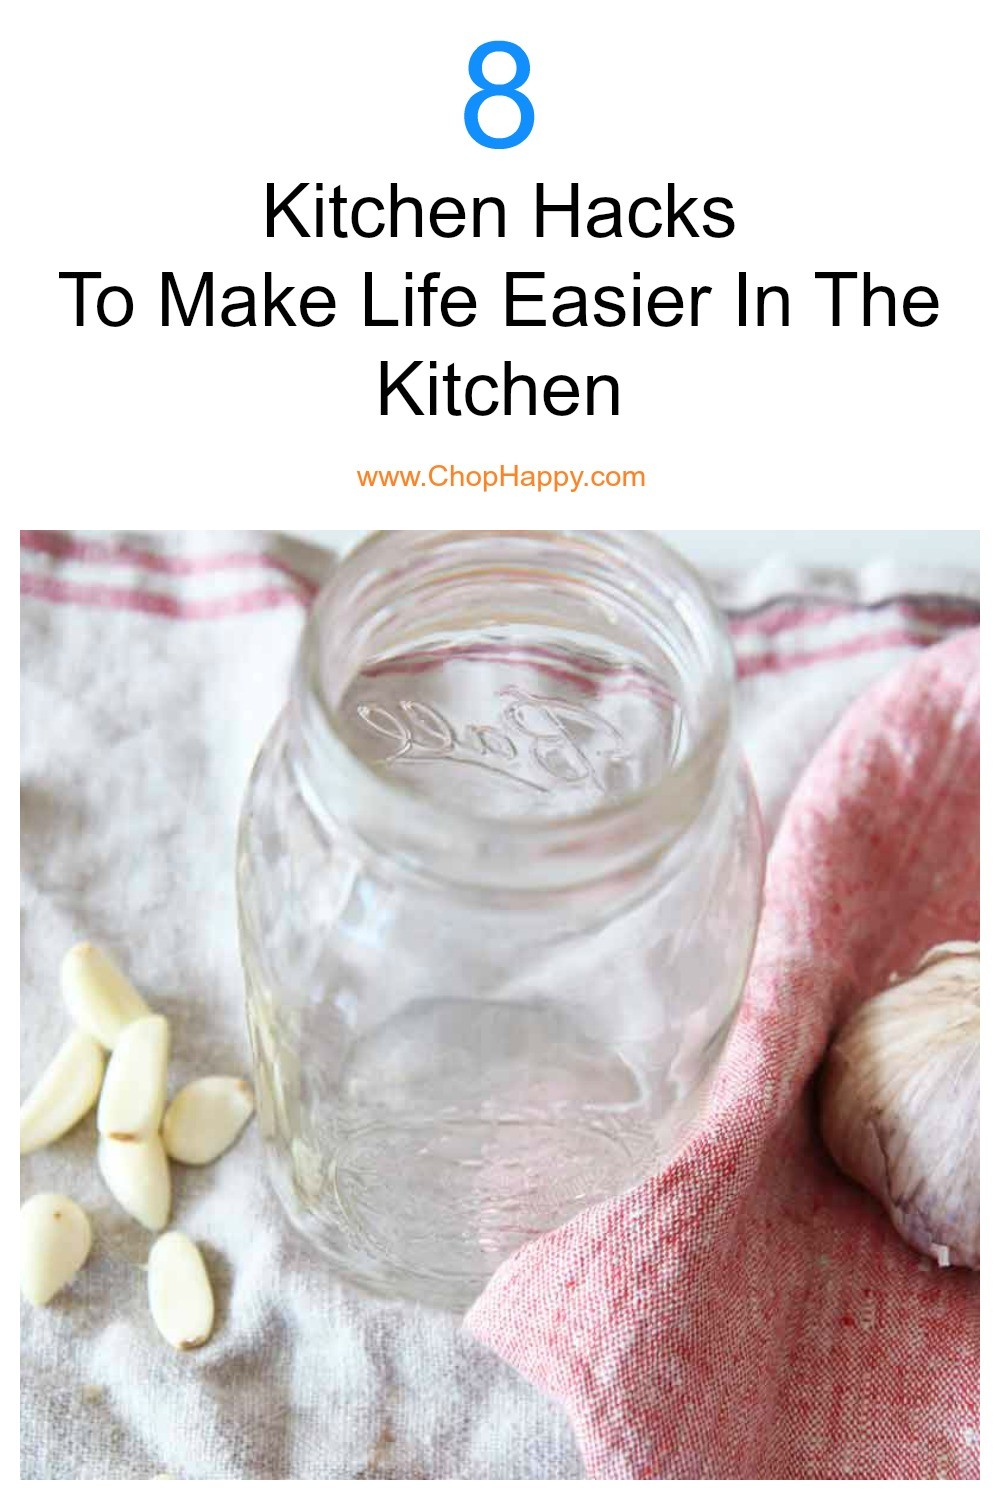 8 Kitchen Hacks To Make Life Easier In The Kitchen. Happy Cooking! www.ChopHappy.com #cookinghacks #cookingtips